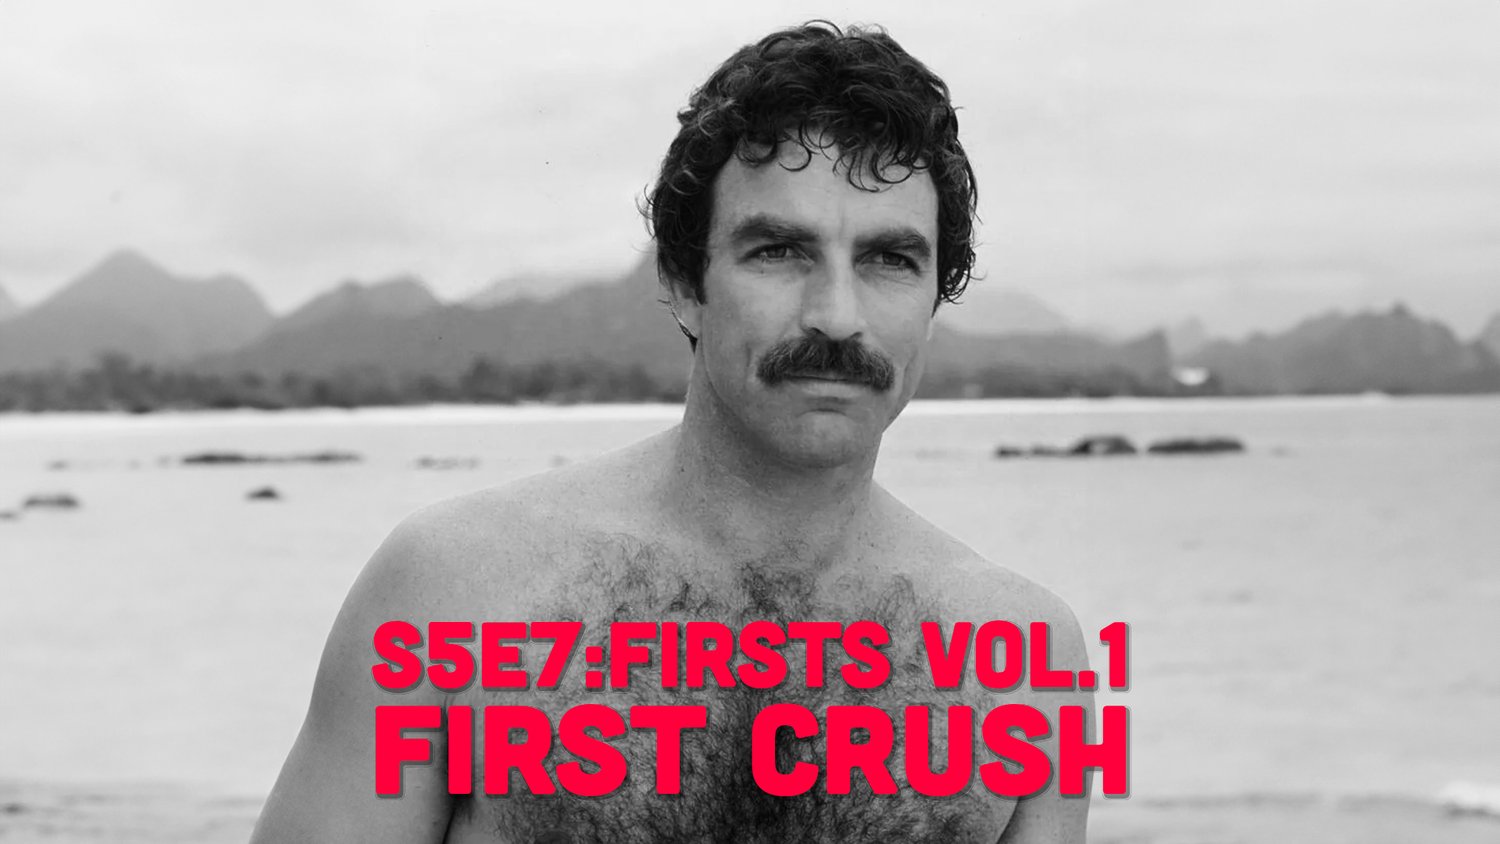 S5E7 - Firsts Vol.1: First Crush